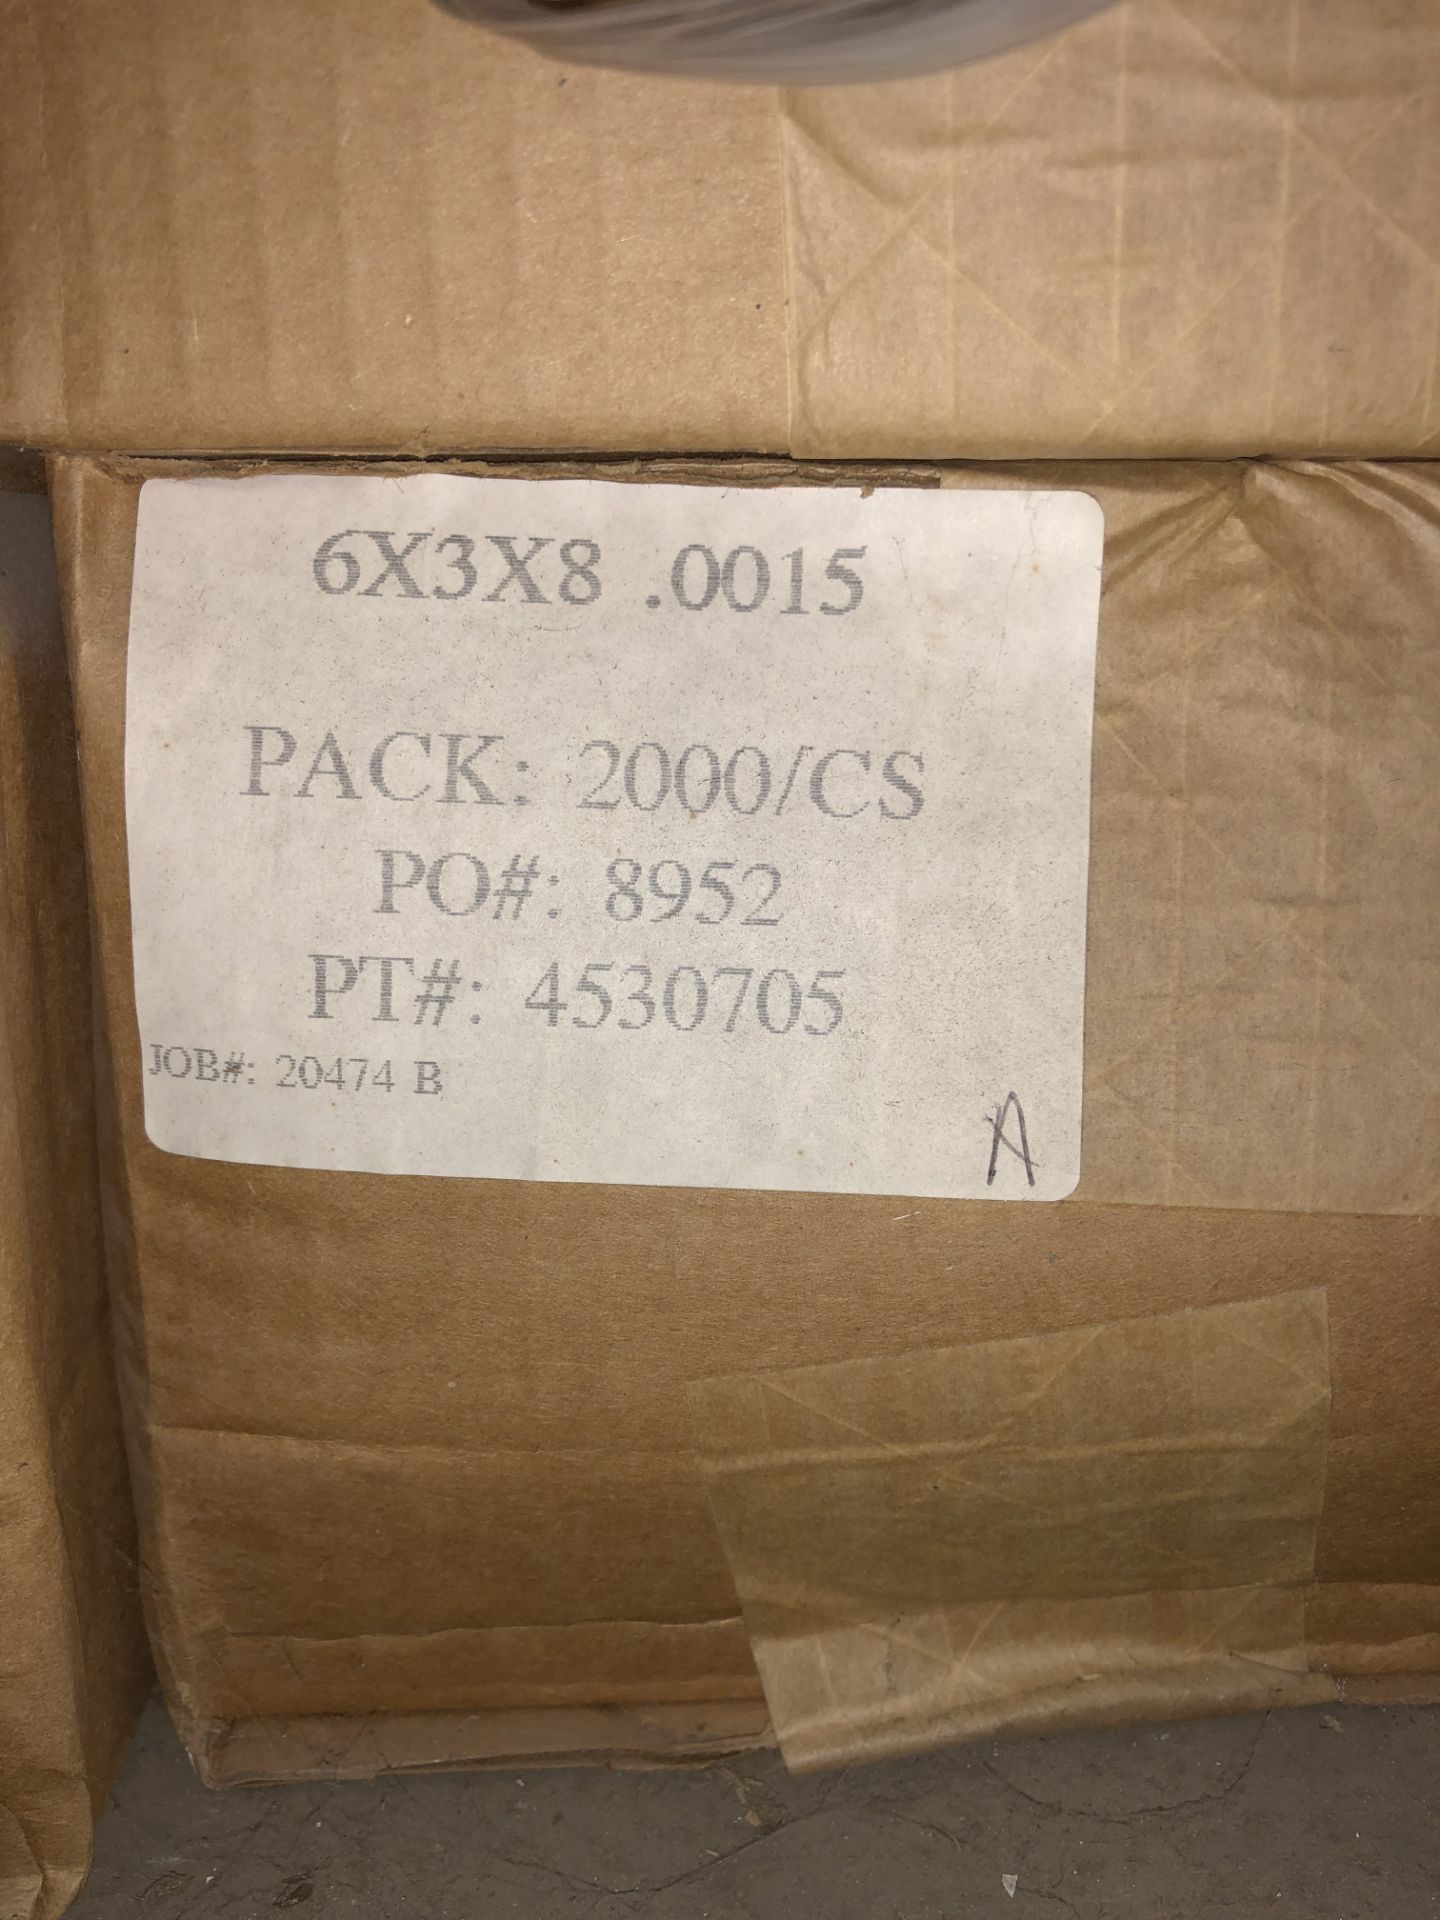 PALLET OF ASSORTED PLASTIC BAGS 2000 PER BOX 10" X 10"; 6" X 3" X 8" - Image 2 of 4